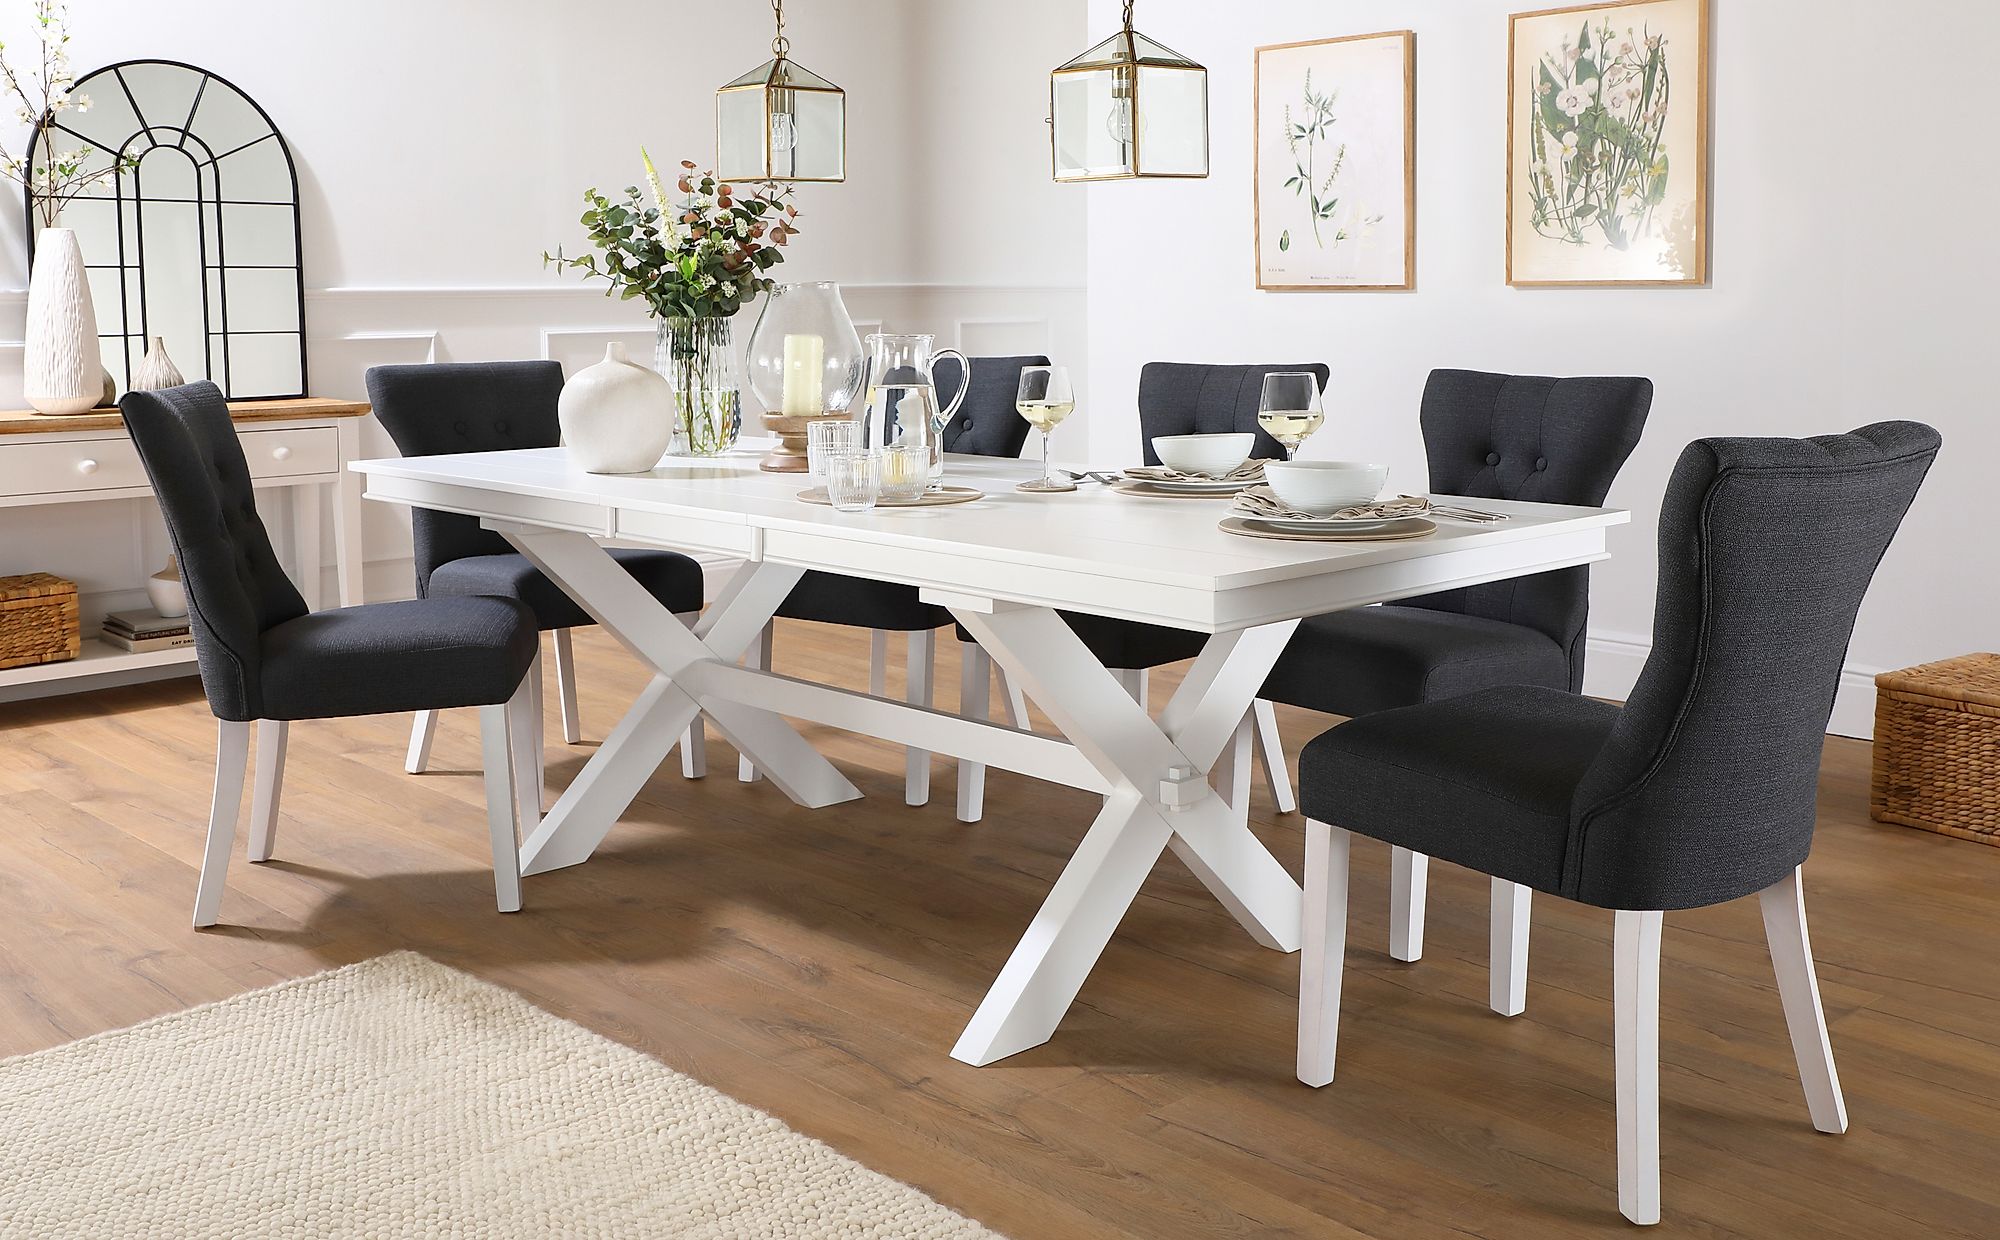 What Color Dining Table Goes With Dark Wood Floors?插图1